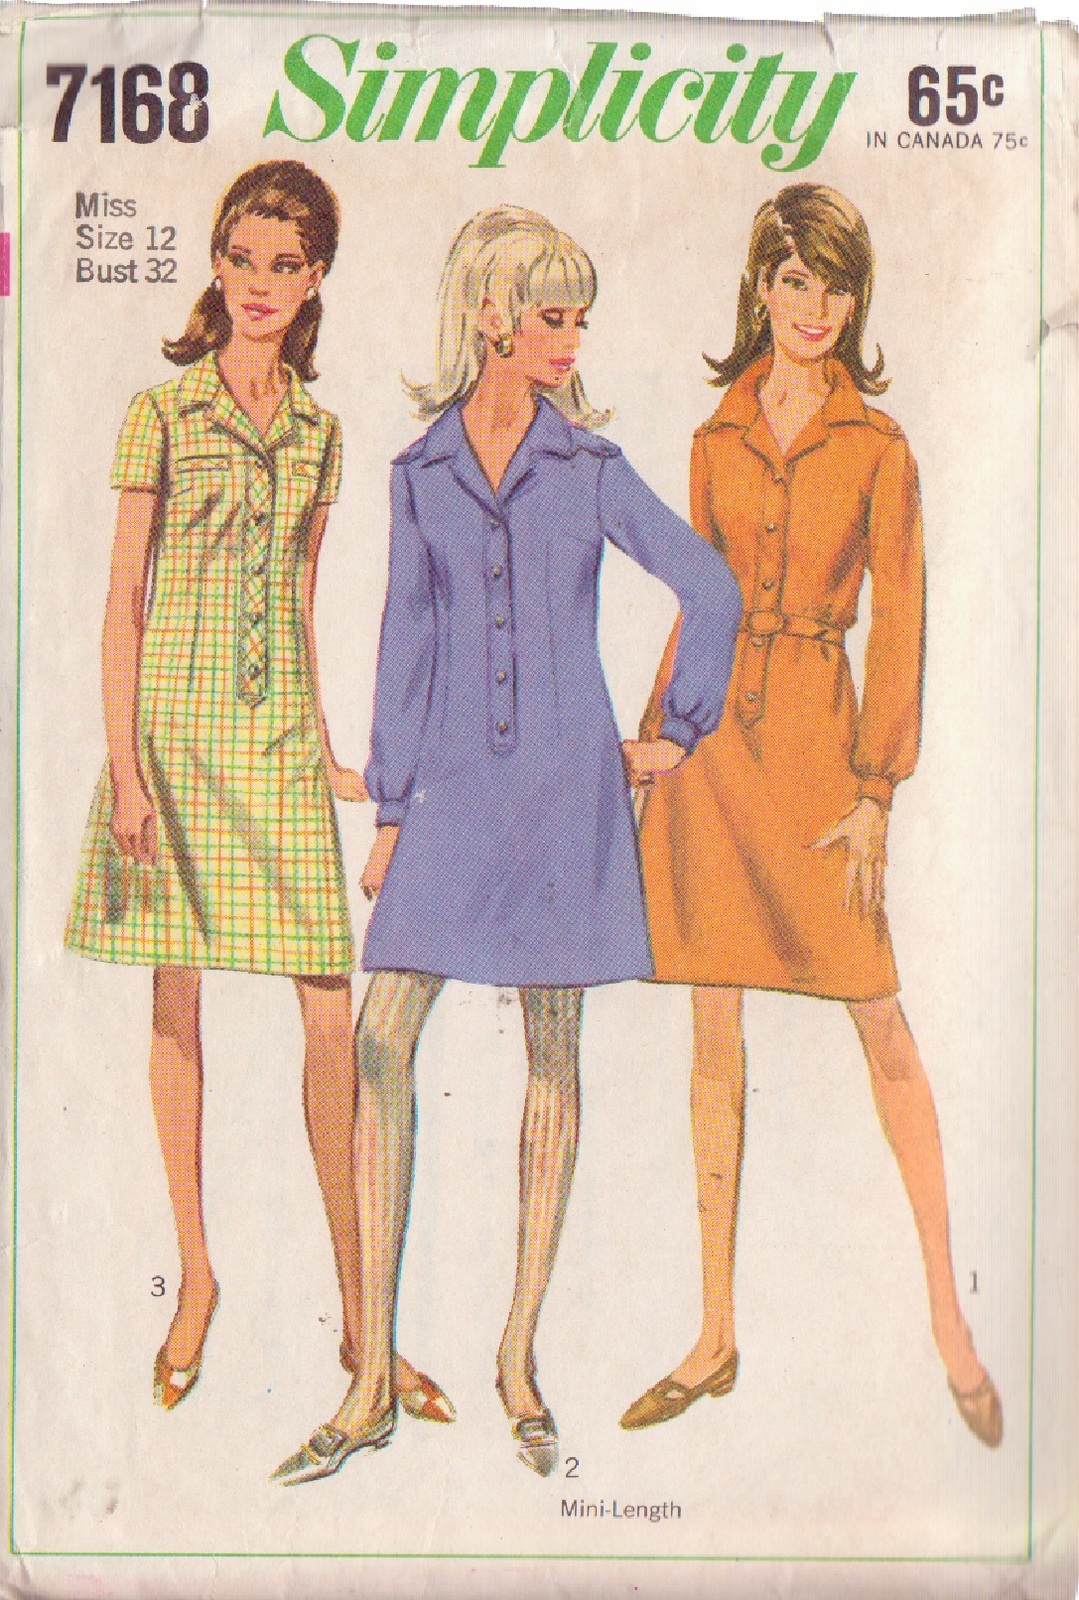 SIMPLICITY PATTERN 7168 SIZE 12 MISSES' SHIRT DRESS IN TWO LENGTHS - $3.00